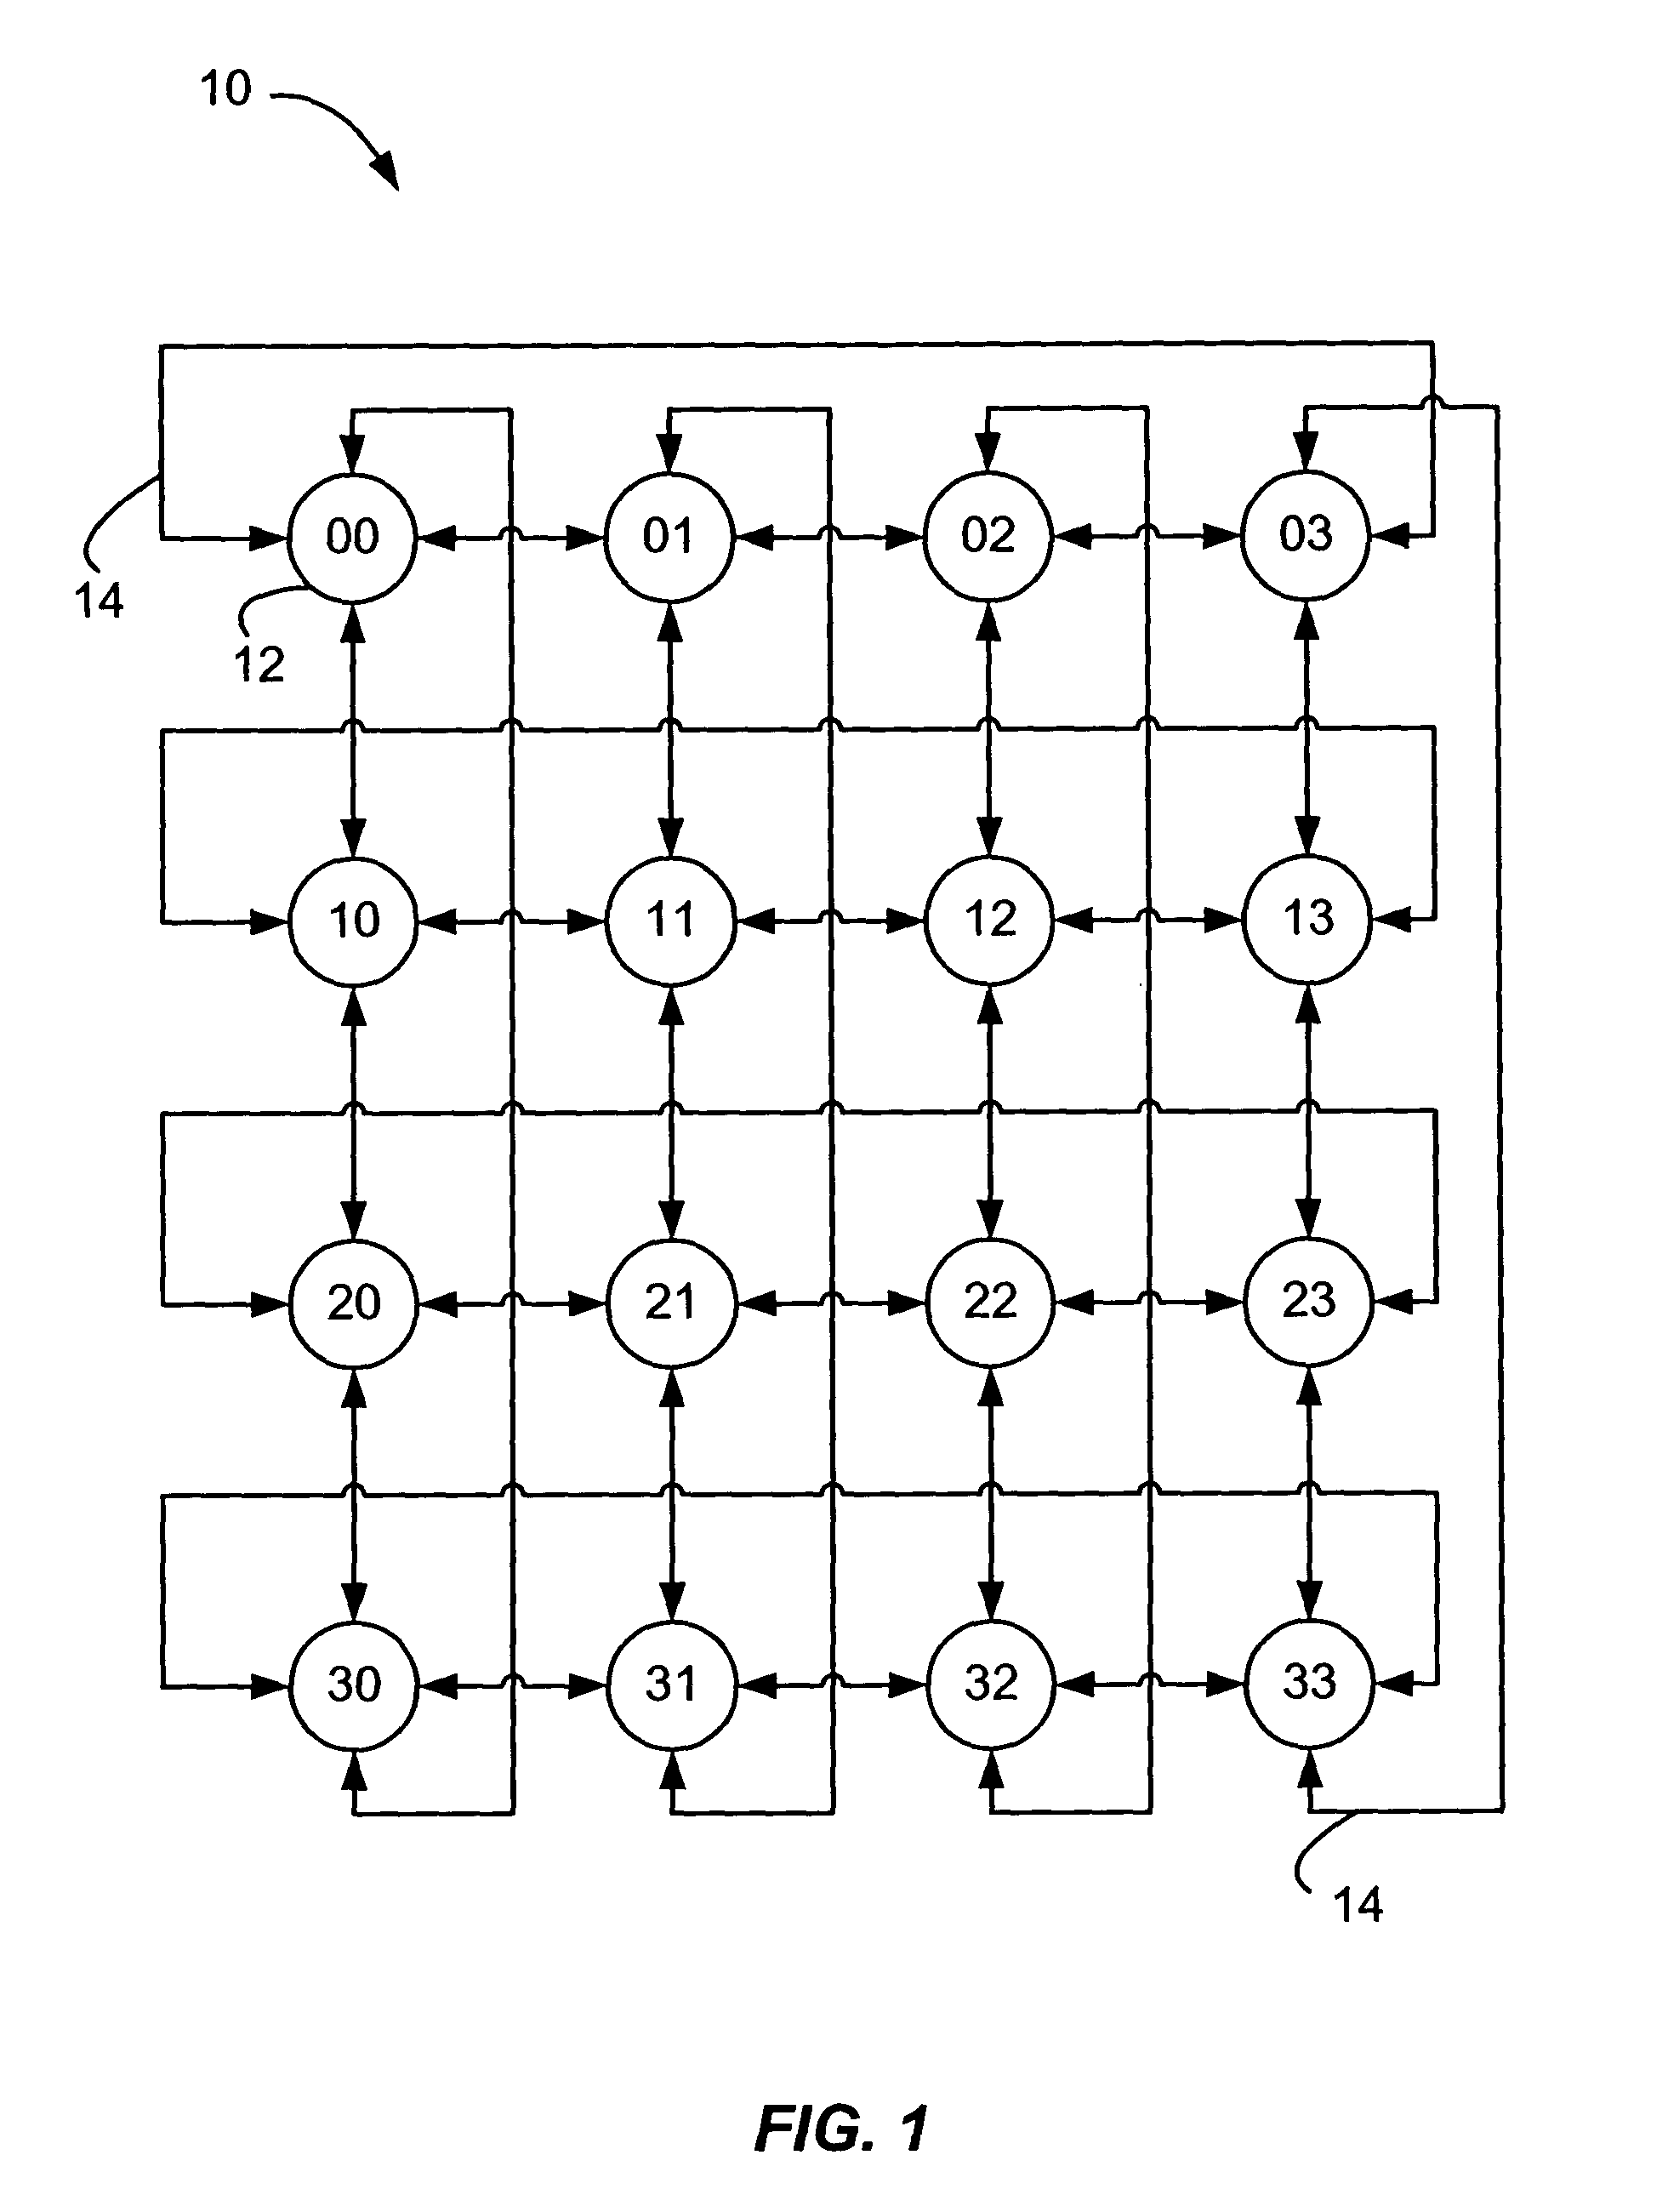 Systems and methods for routing packets in multiprocessor computer systems